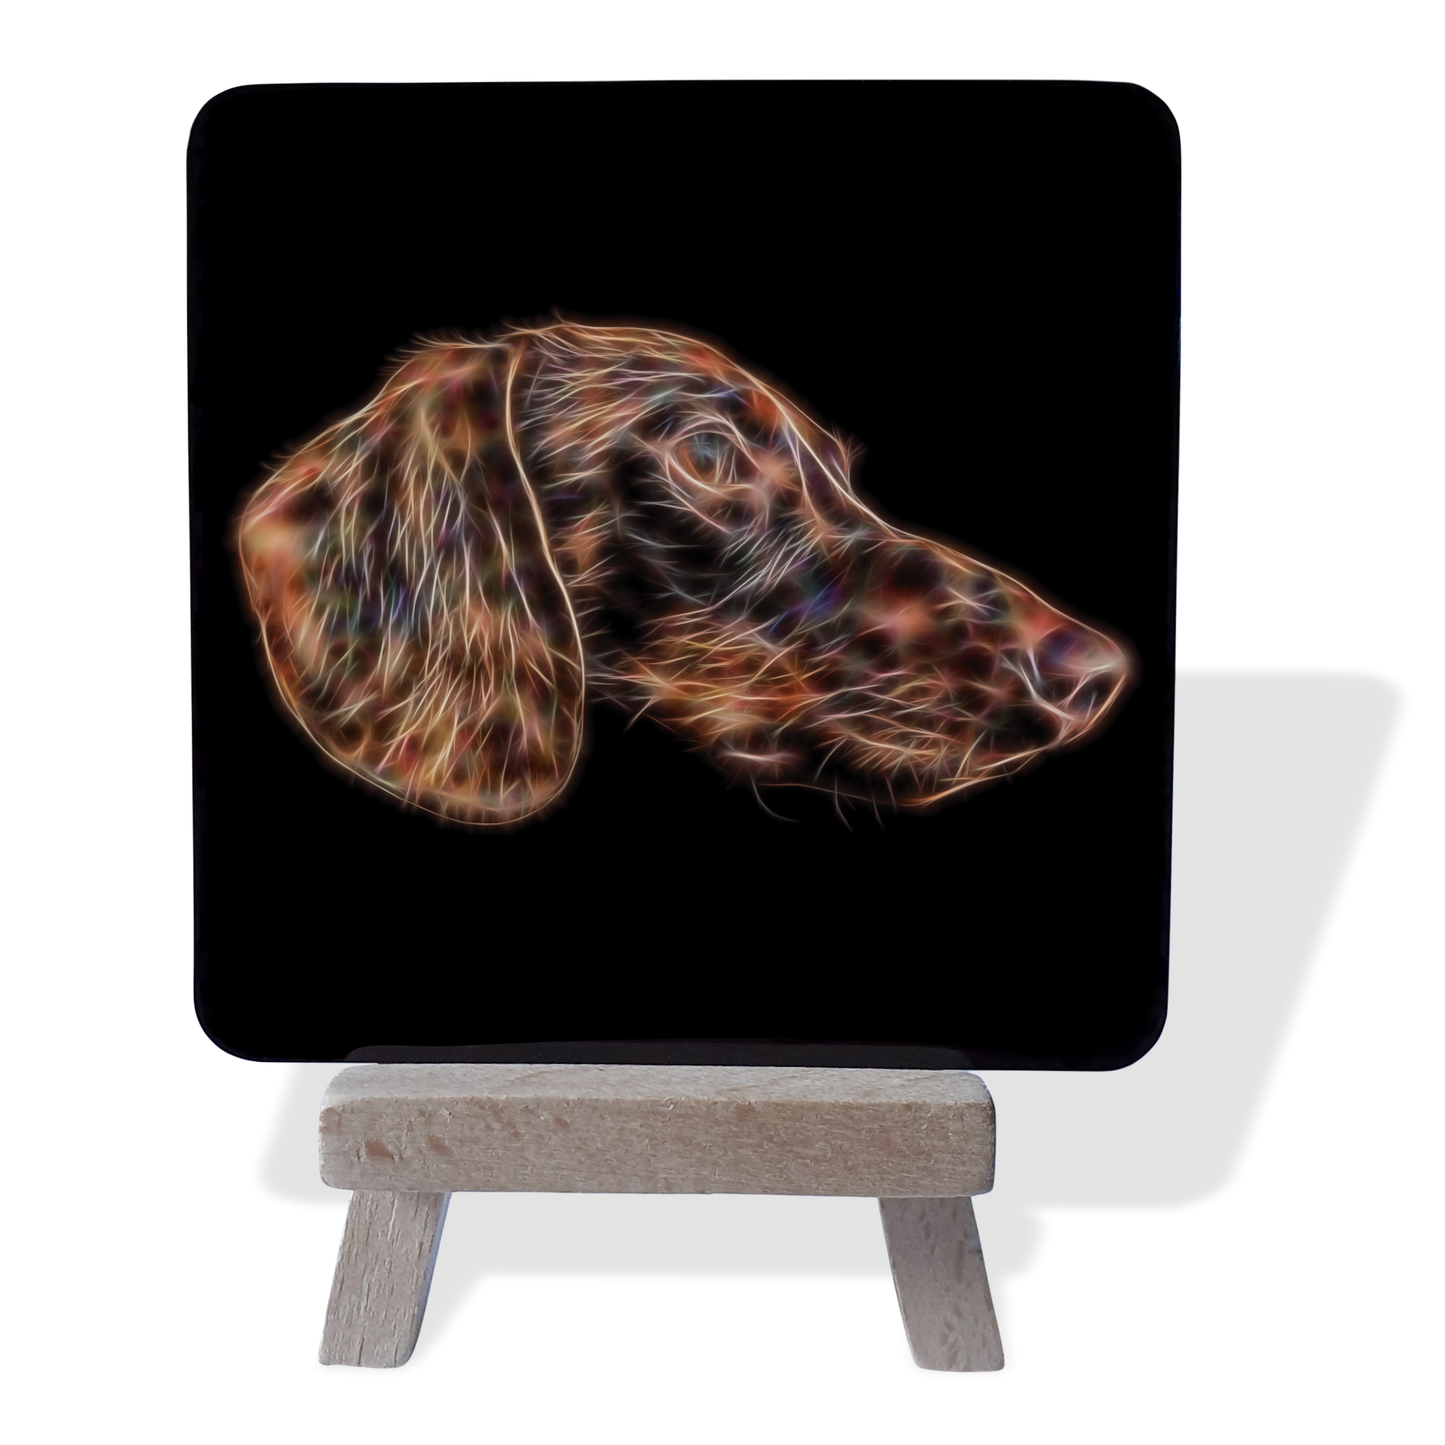 Chocolate Dachshund #4 Metal Plaque and Mini Easel with Fractal Art Design